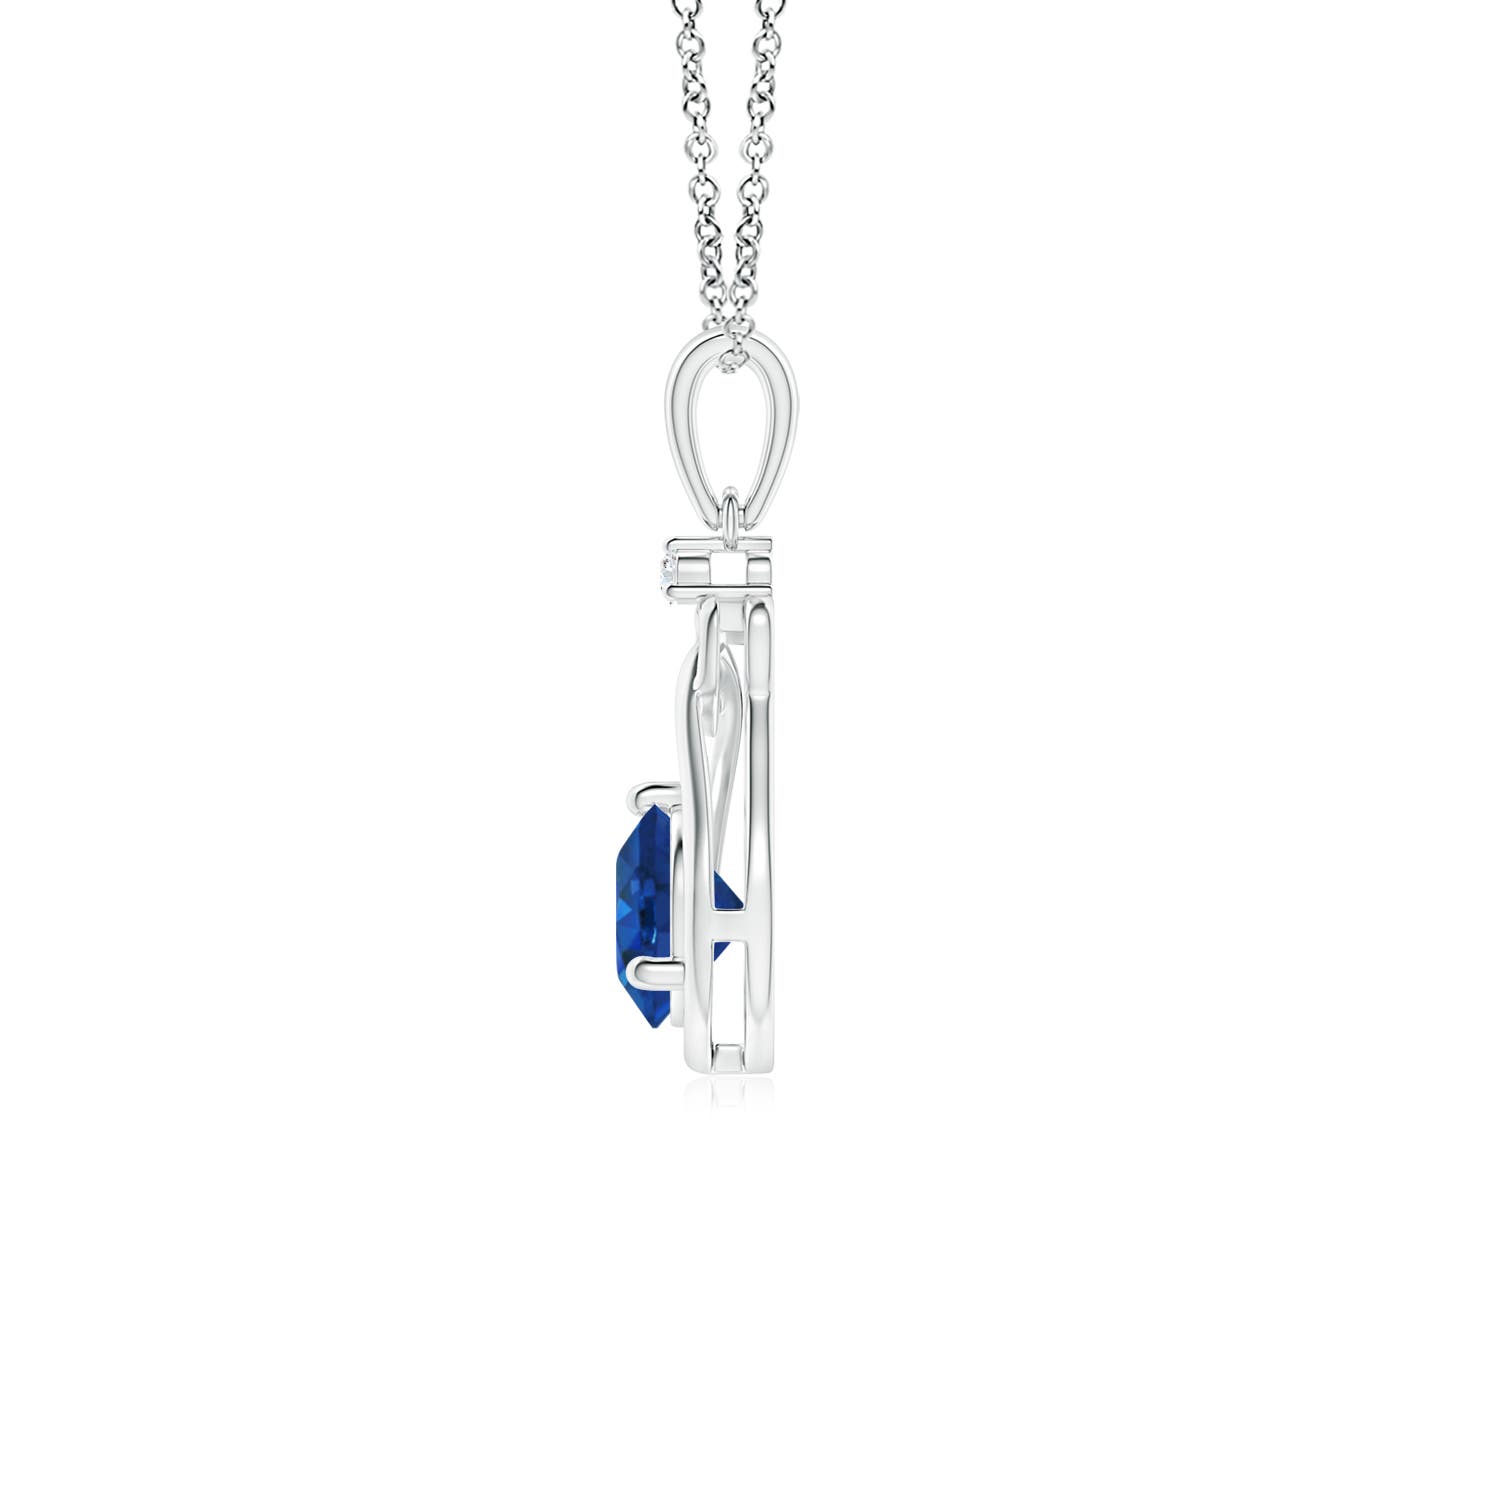 AAA - Blue Sapphire / 0.61 CT / 14 KT White Gold